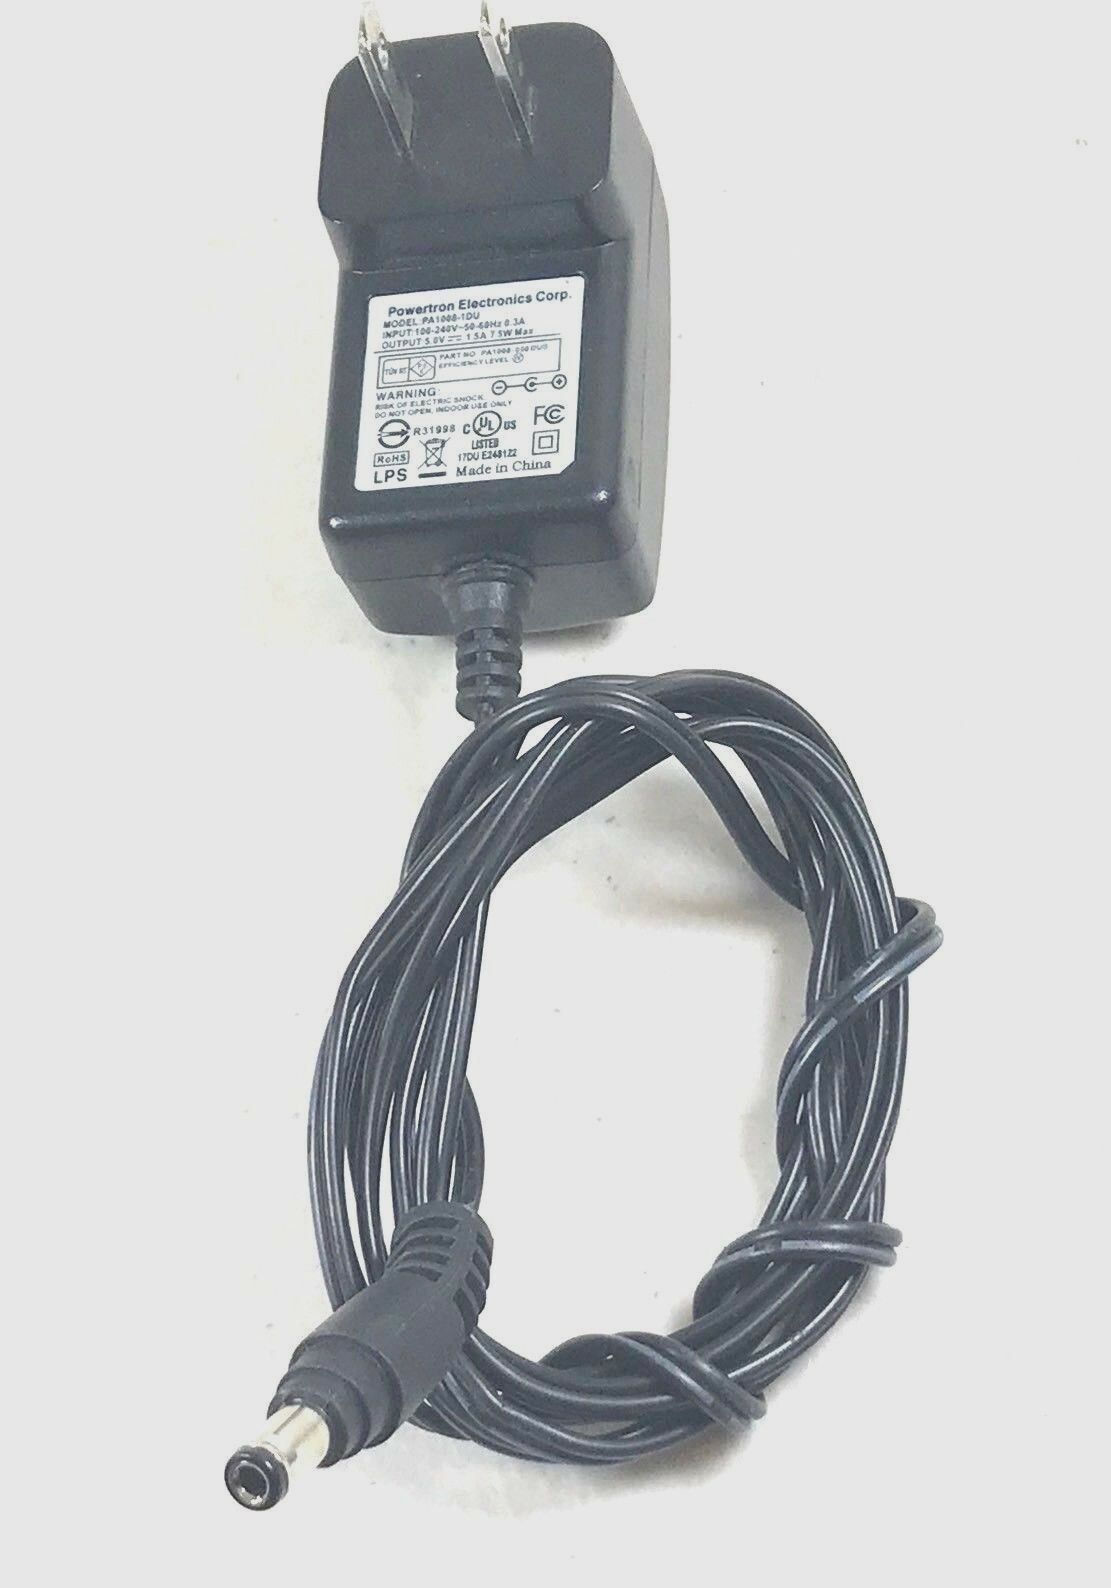 NEW 5.0V DC 1.0A AC Adapter For Powertron Electronics PA1008-1DU Power Supply - Click Image to Close